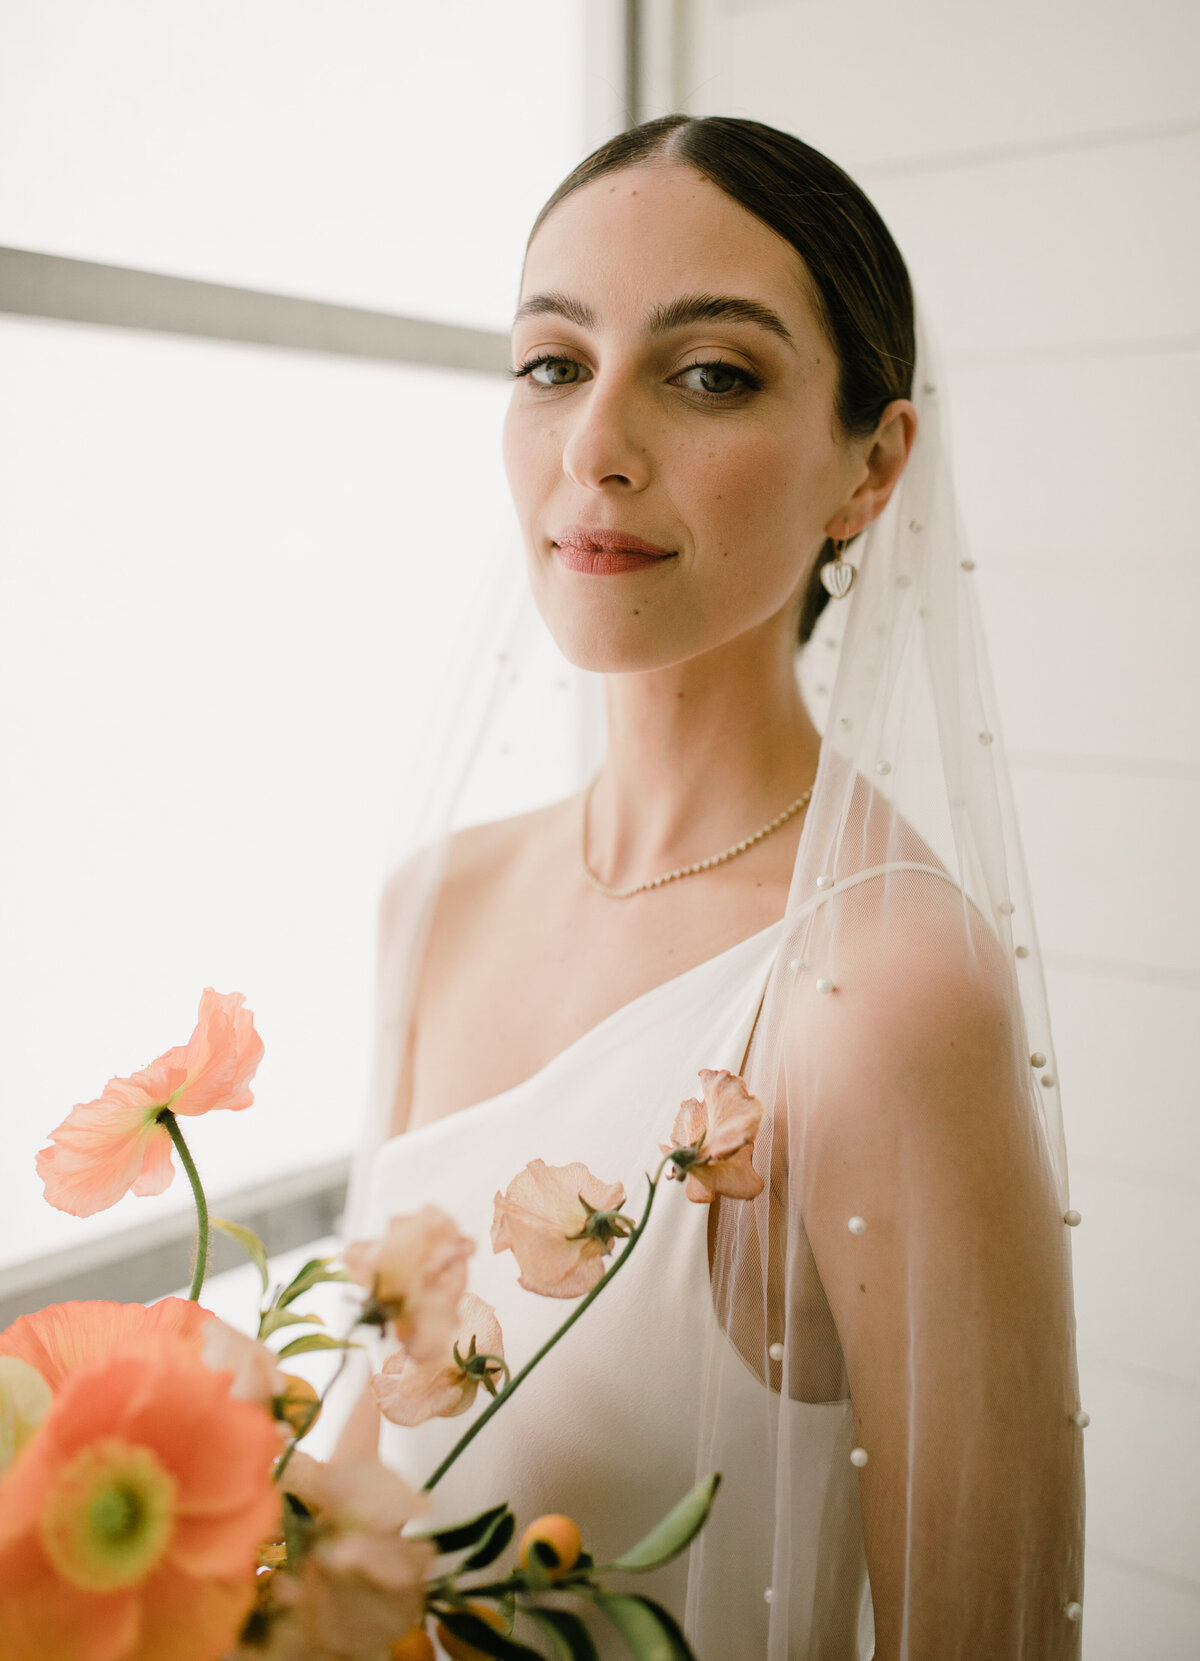 Bride wearing sleek white dress holding bouquet of white orange and yellow florals